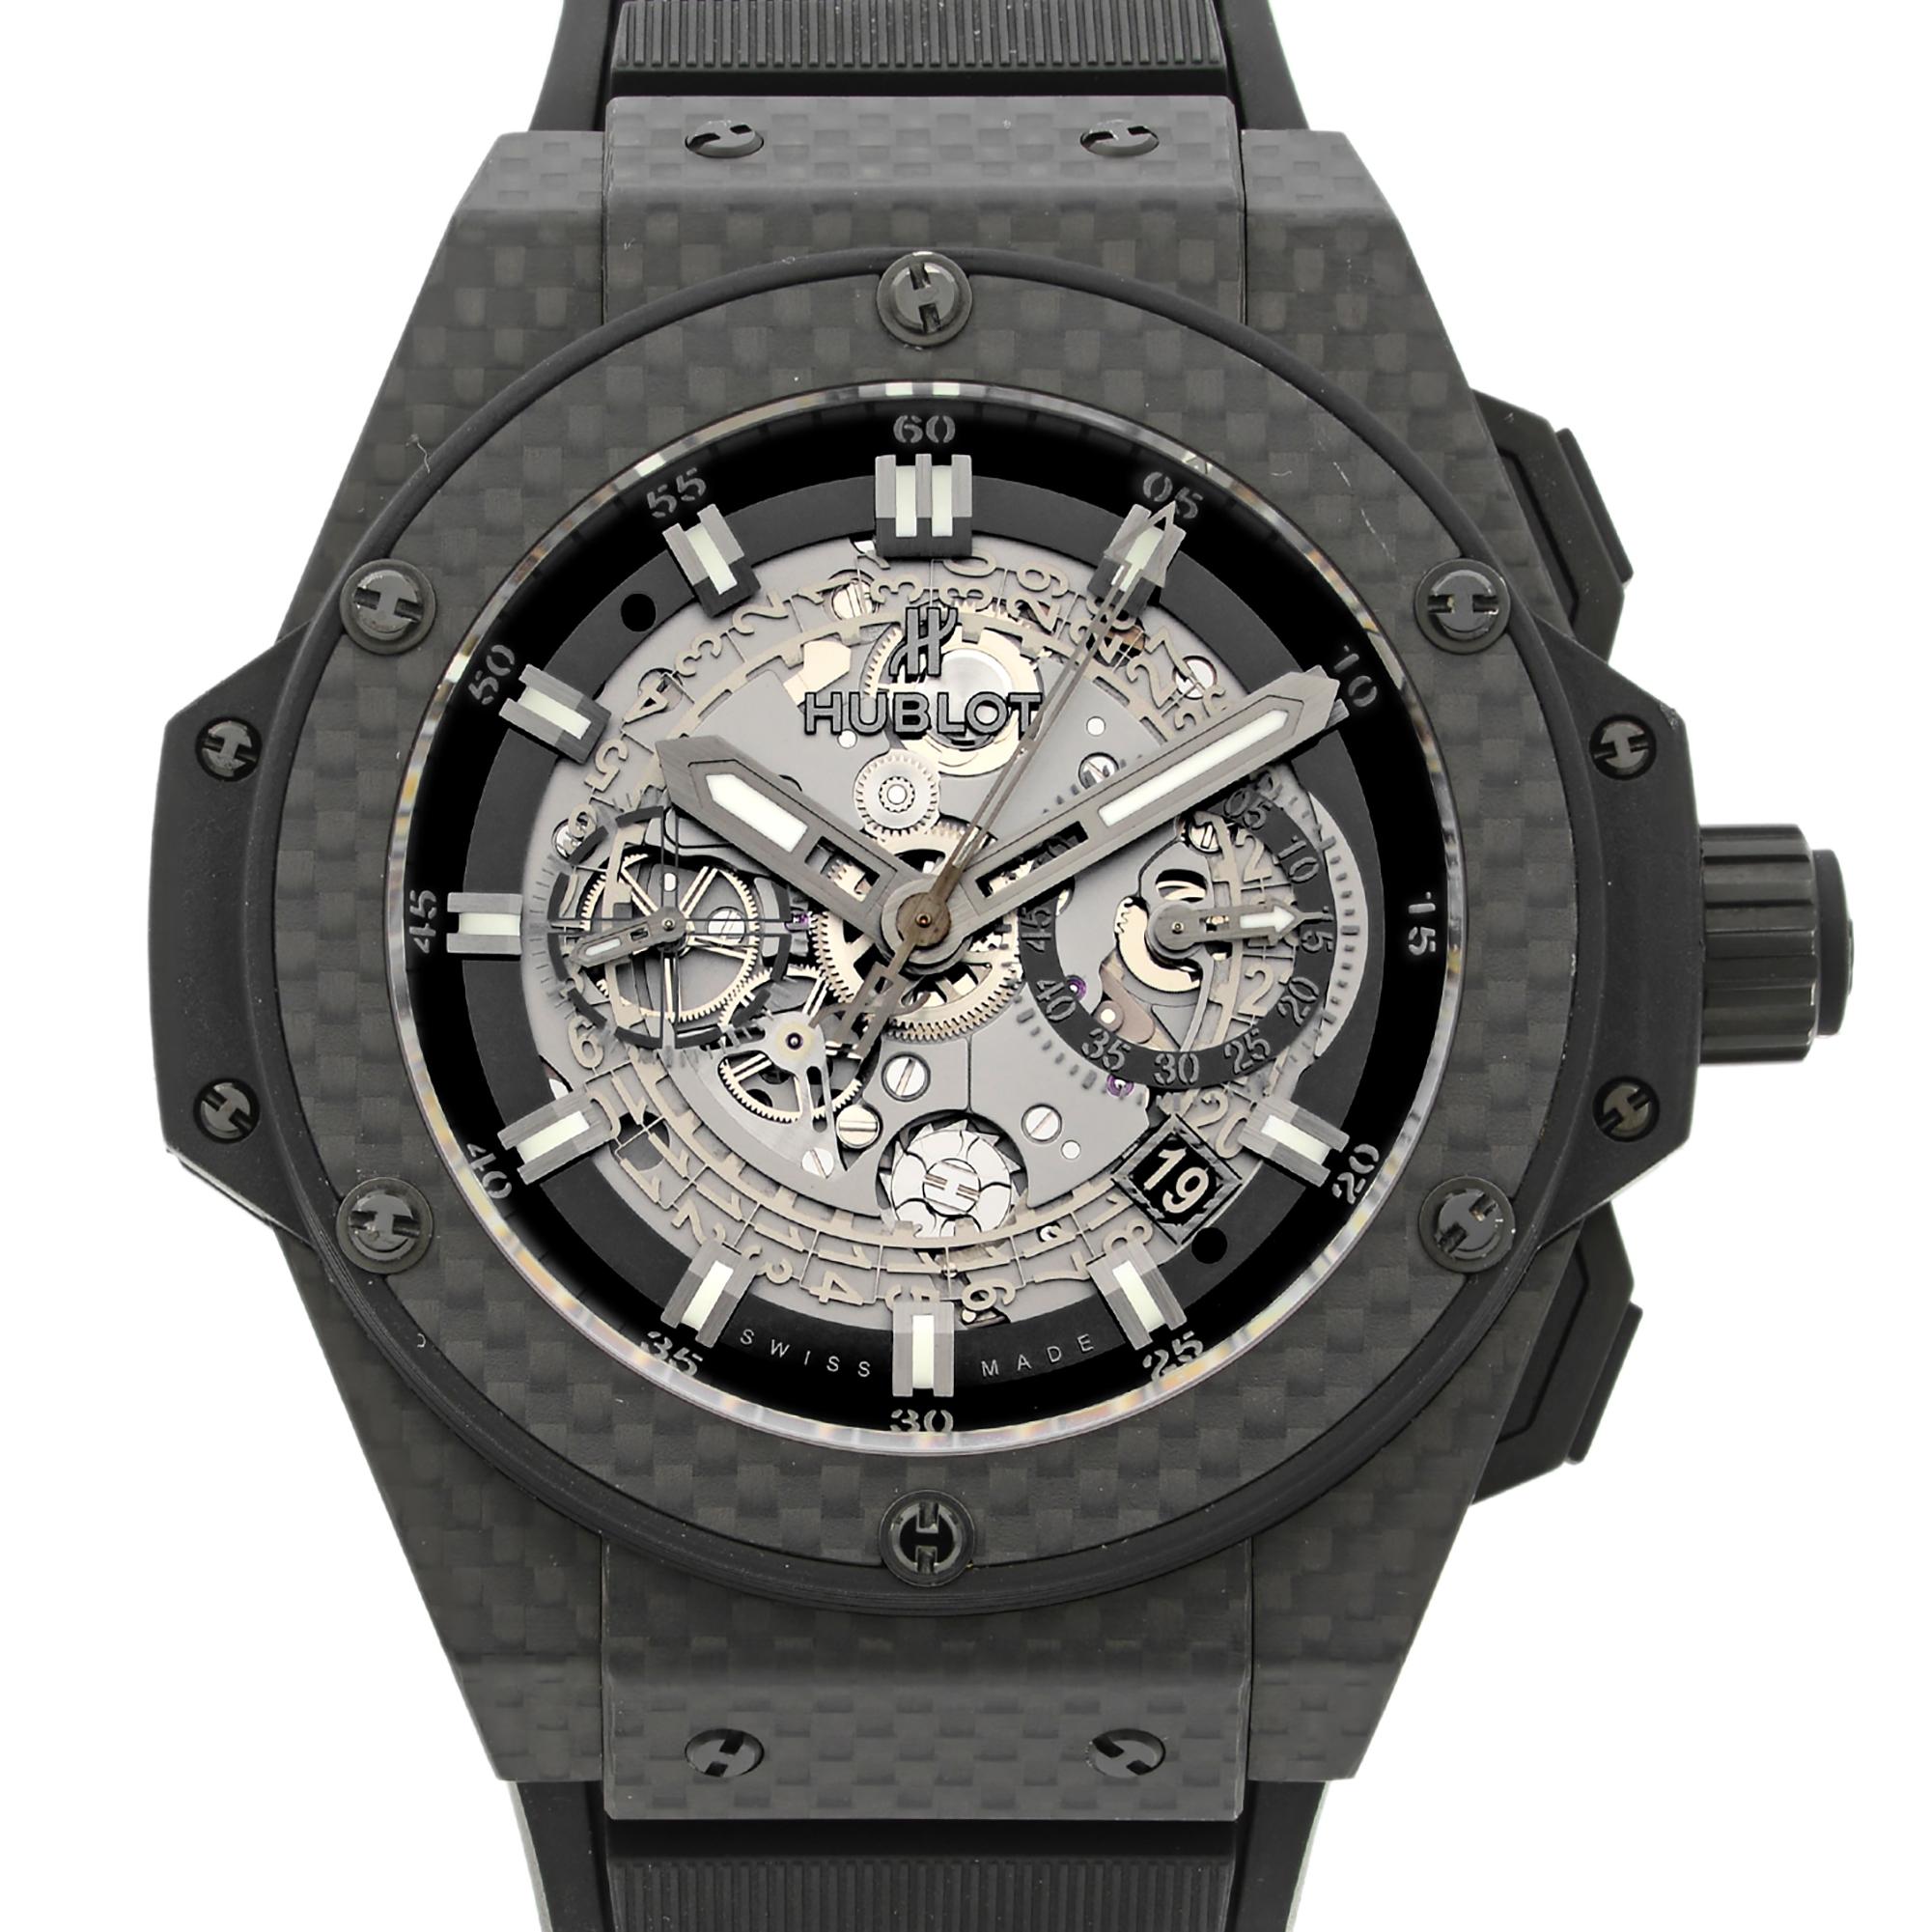 This pre-owned Hublot King Power 701.QX.0140.RX is a beautiful men's timepiece that is powered by mechanical (automatic) movement which is cased in a carbon fiber case. It has a tonneau shape face, chronograph, date indicator, small seconds subdial